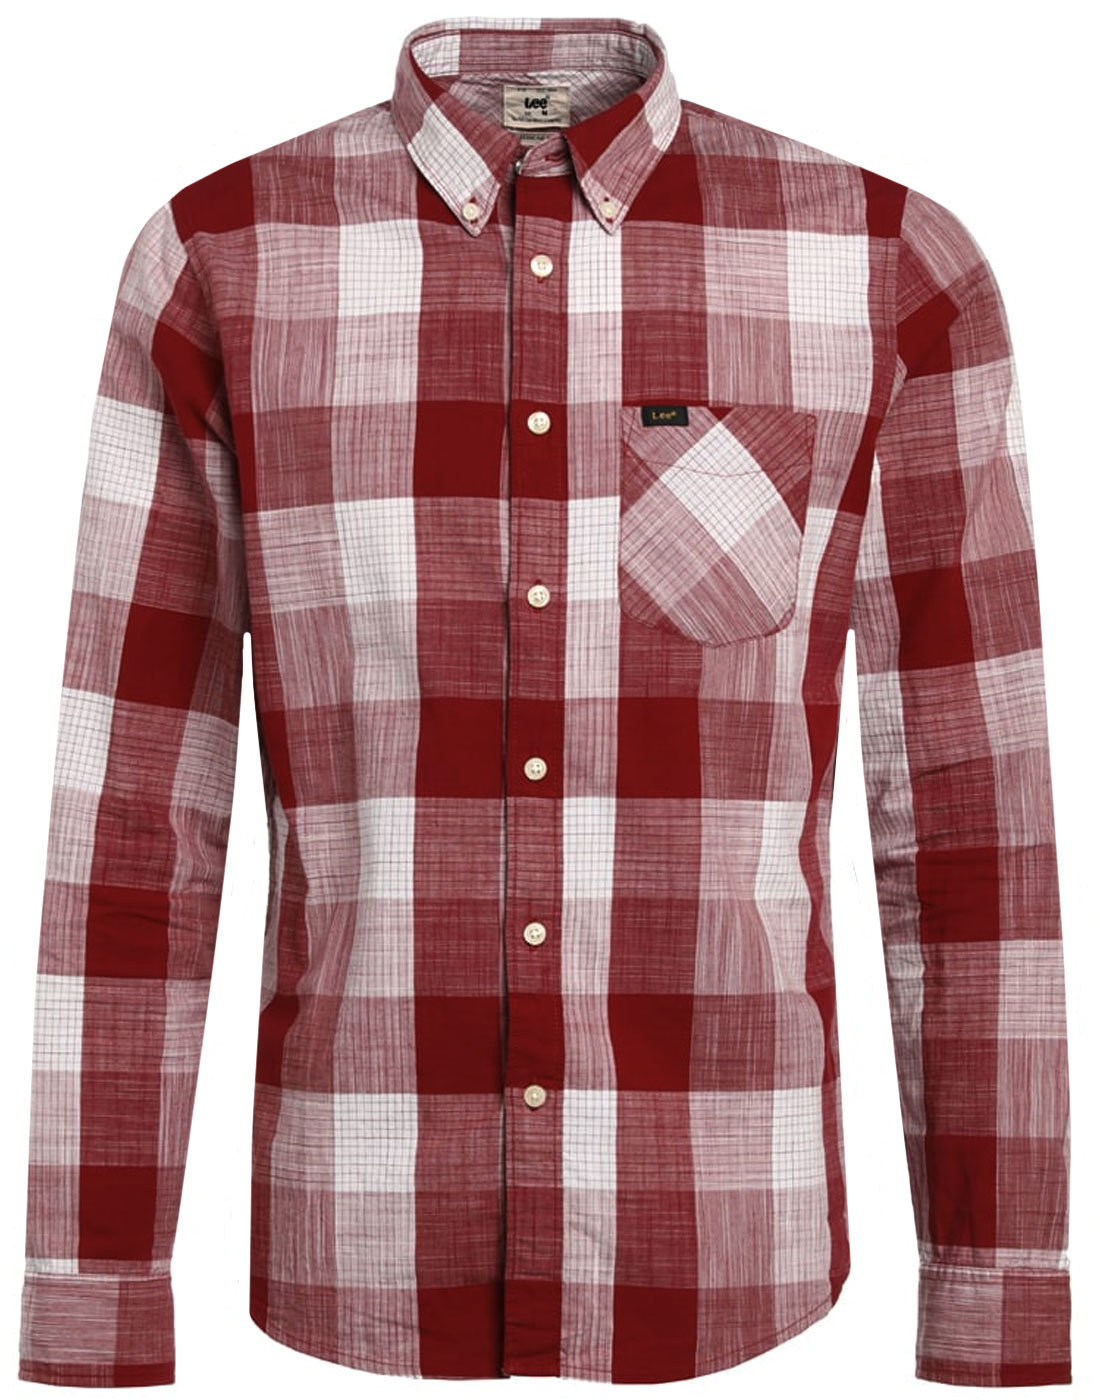 LEE JEANS Men's Retro Mod Block Check Button Down Shirt in Red